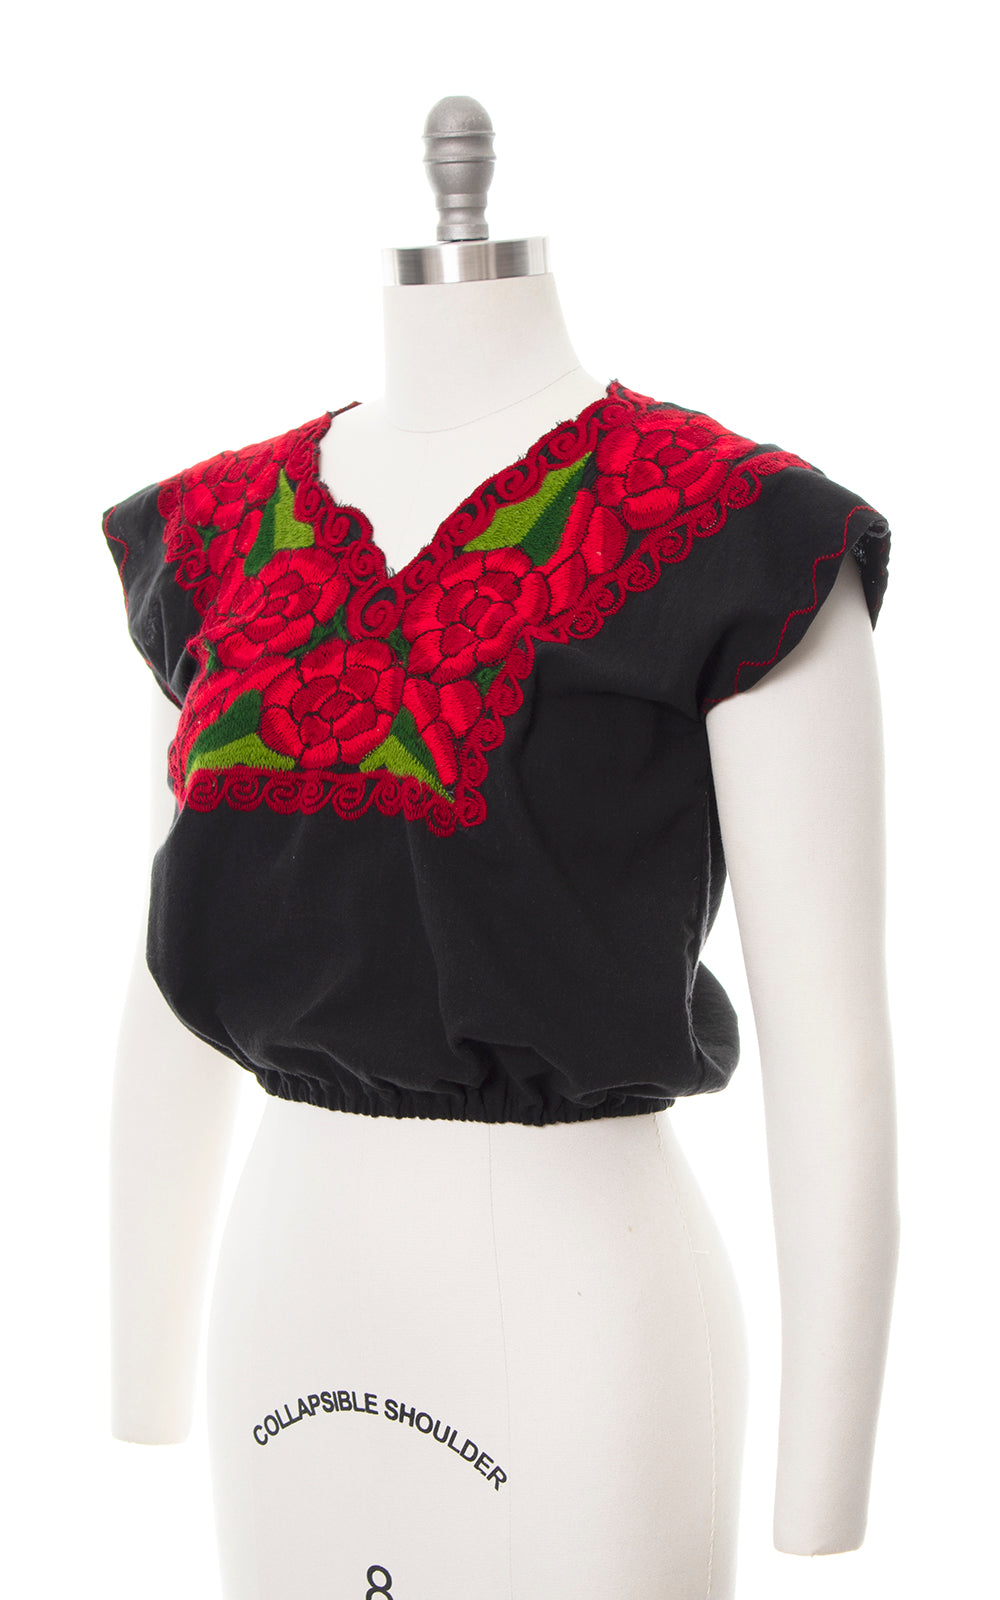 Vintage Floral Embroidered Crop Top | small/medium